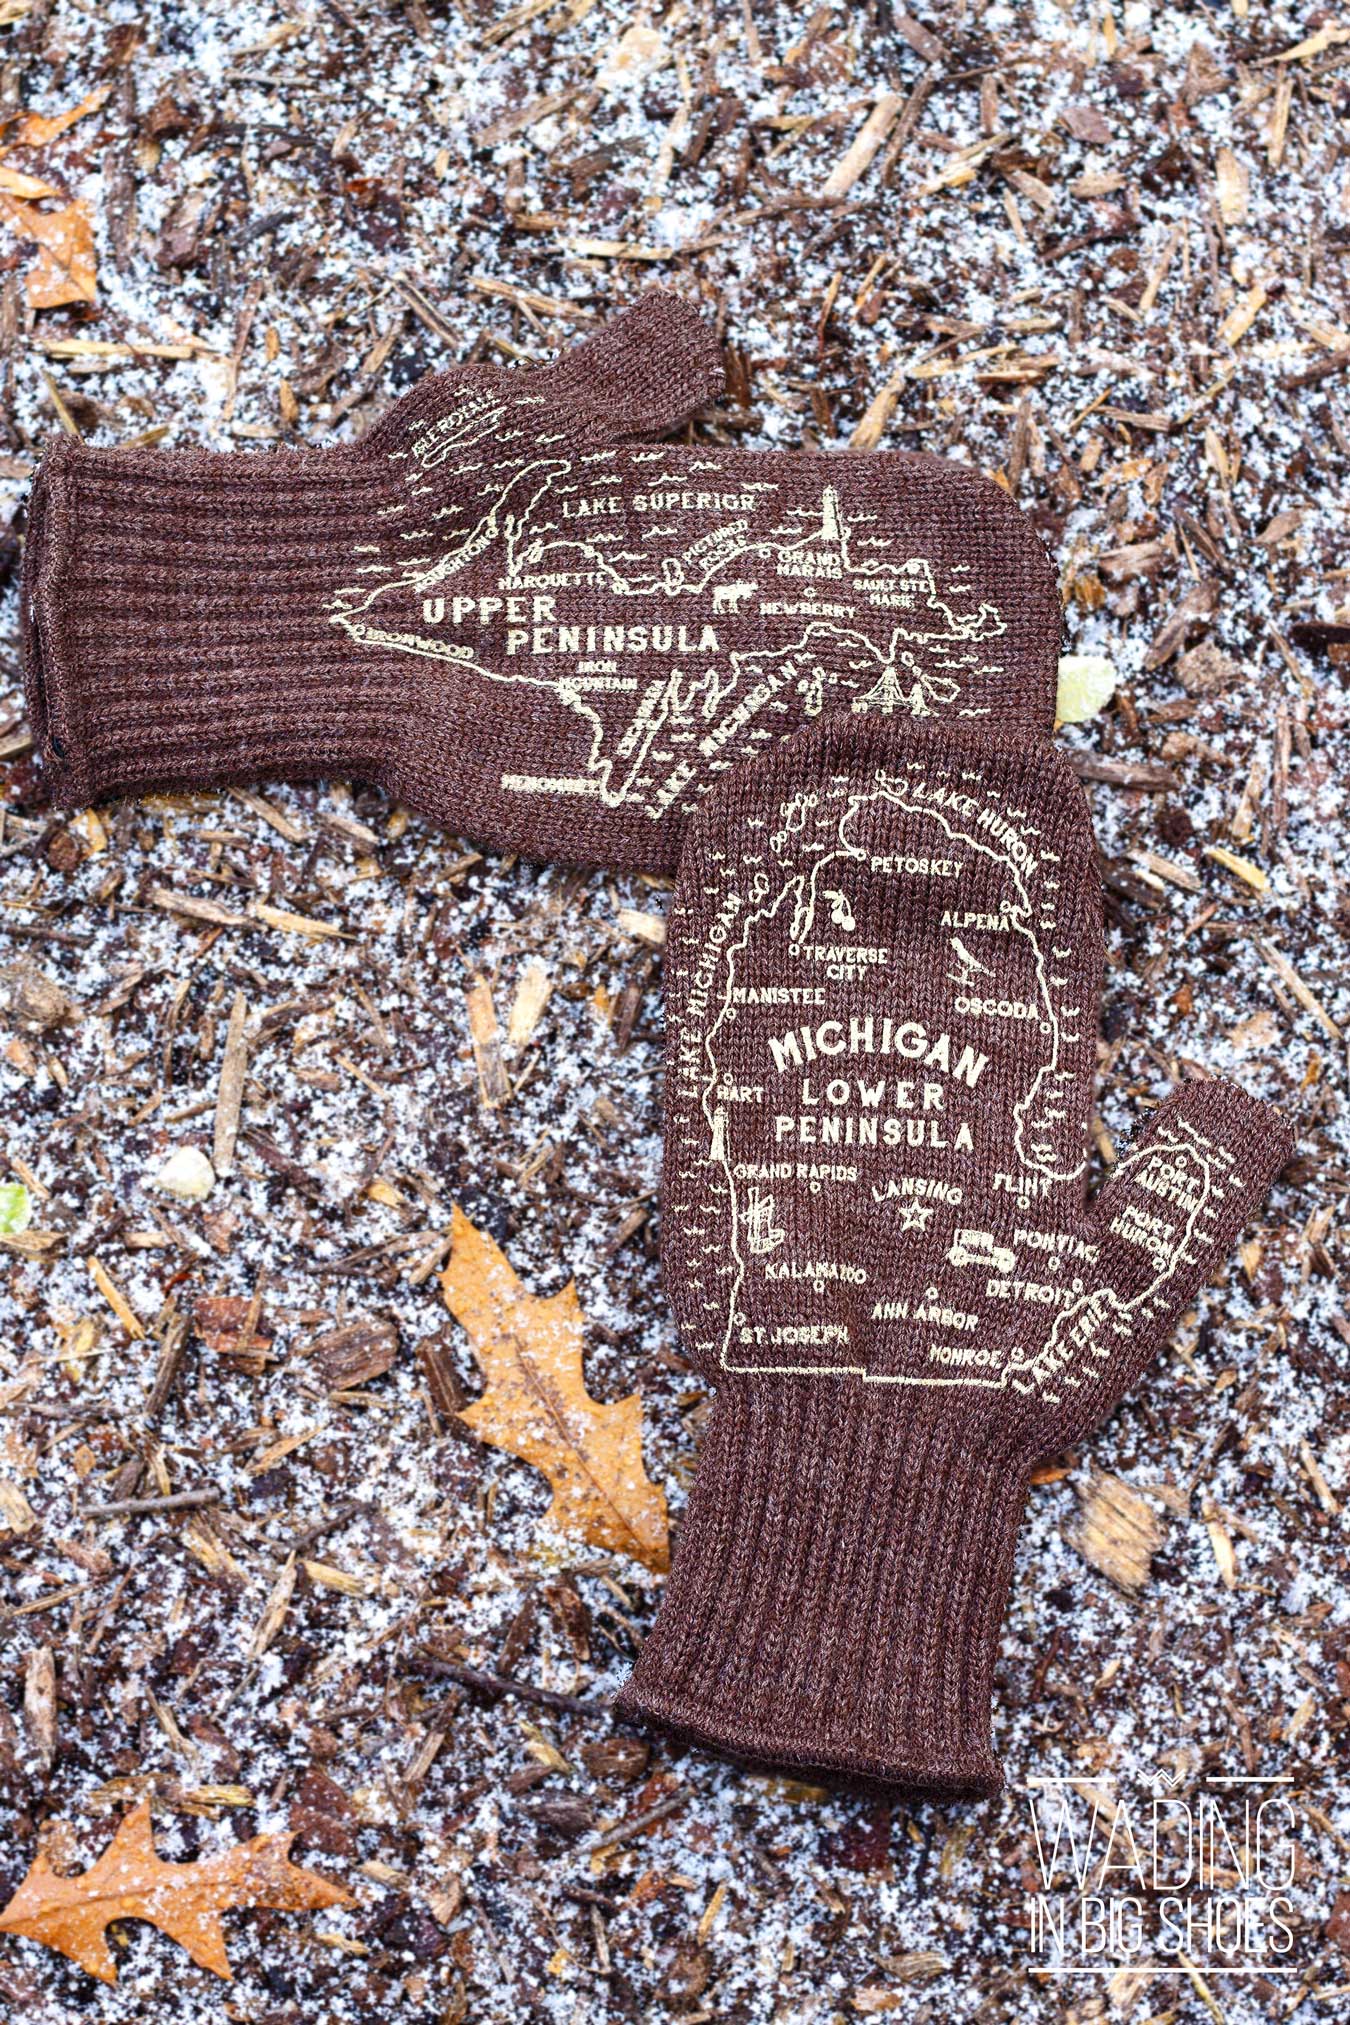 Getting Cozy At Home With Michigan Mittens | via Wading in Big Shoes